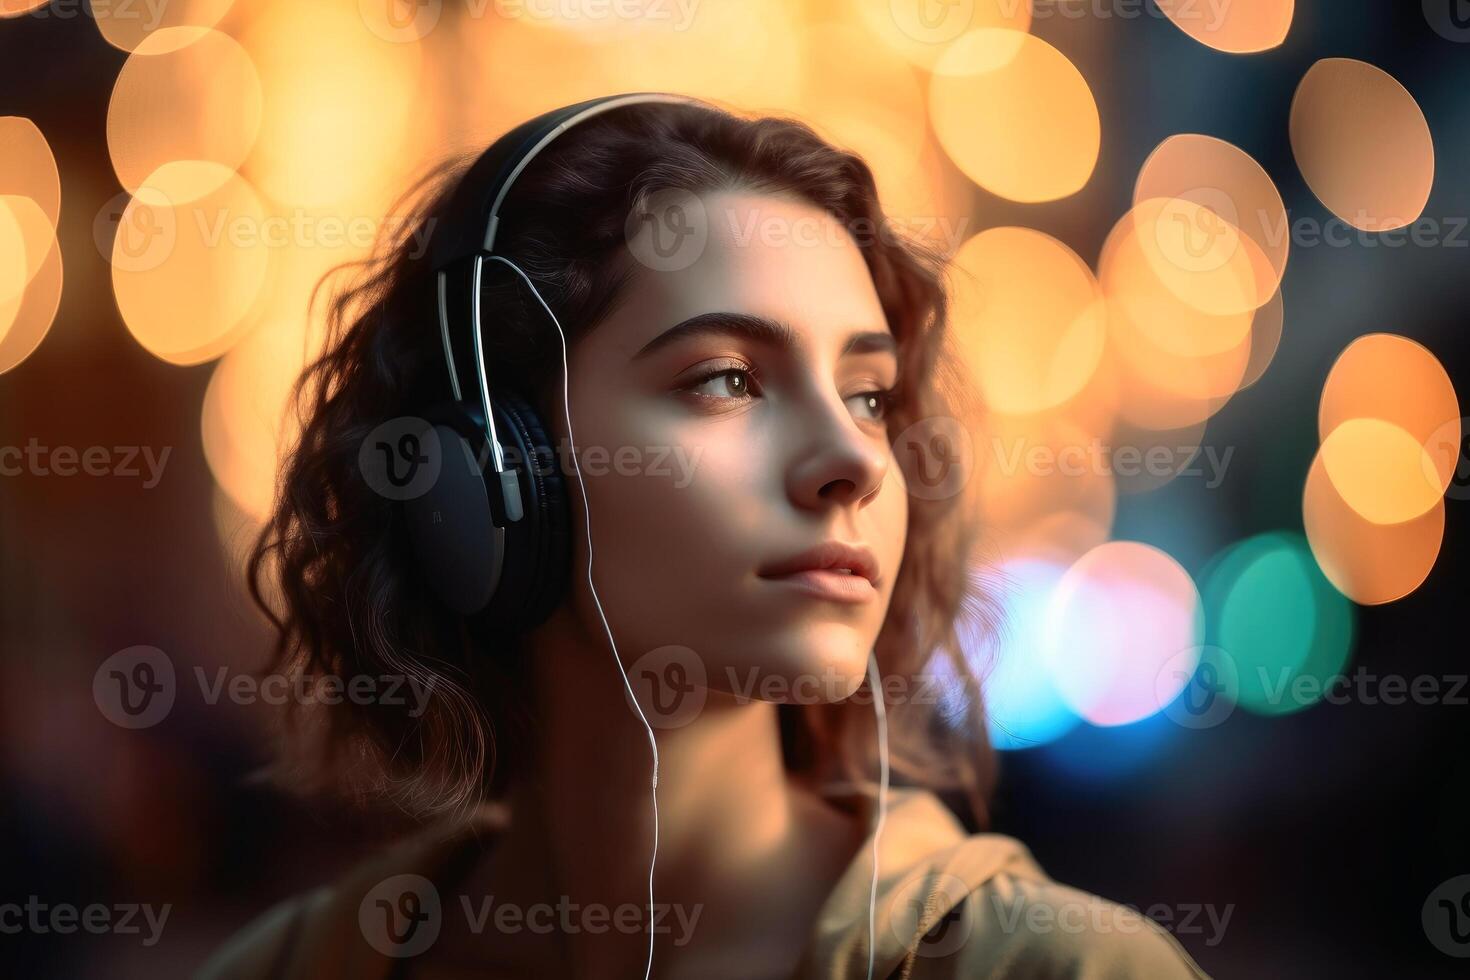 A Woman listening to music created with technology. photo